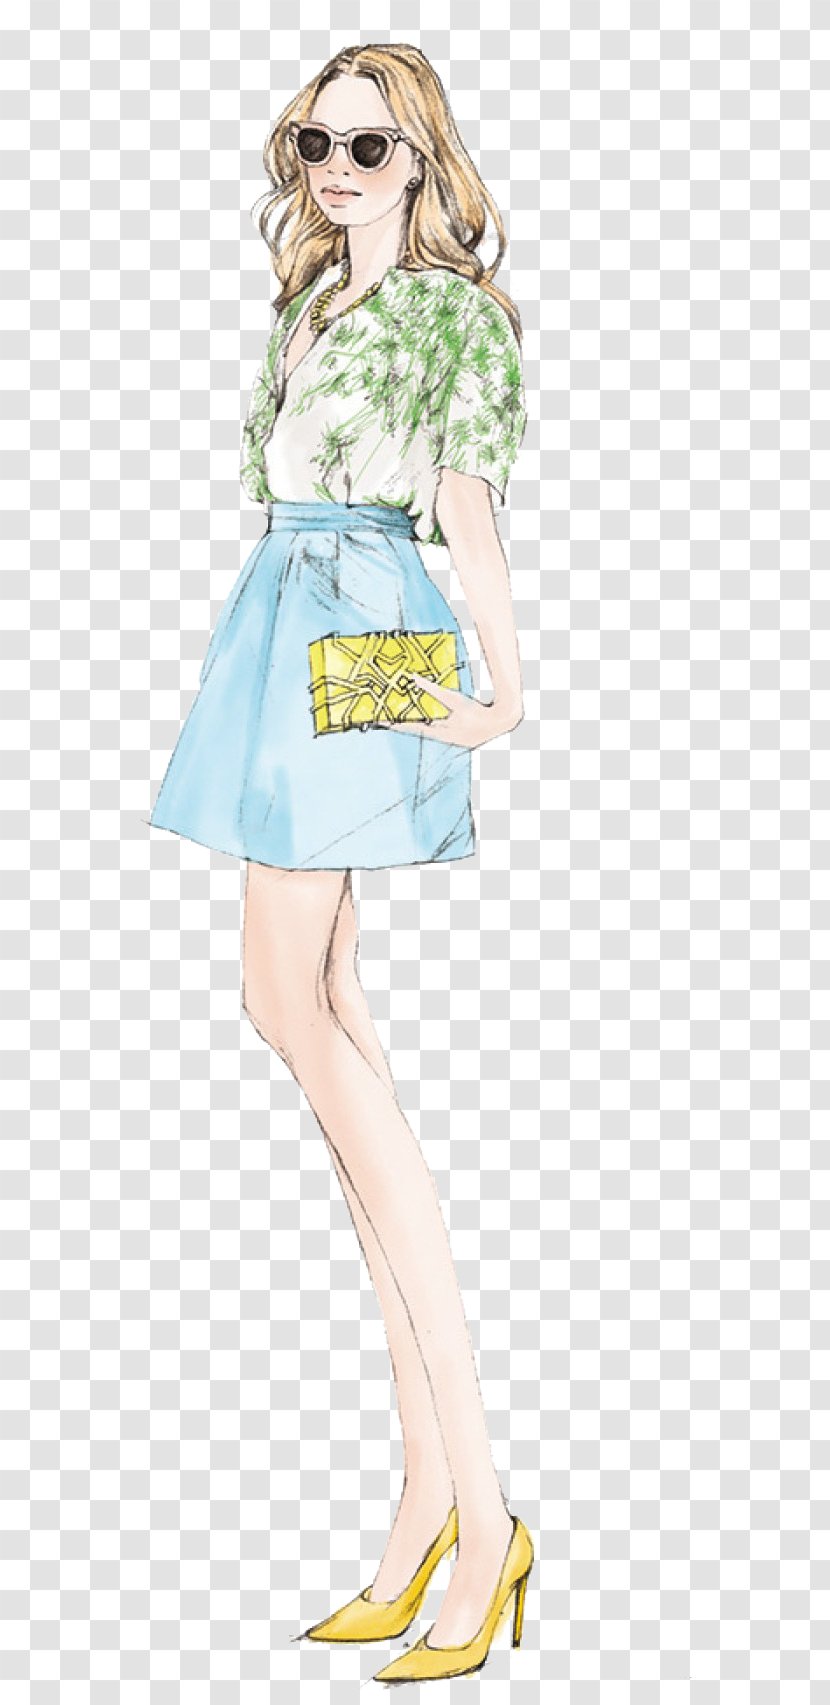 Cartoon Fashion Illustration Drawing - Heart - Hand-painted Women Transparent PNG